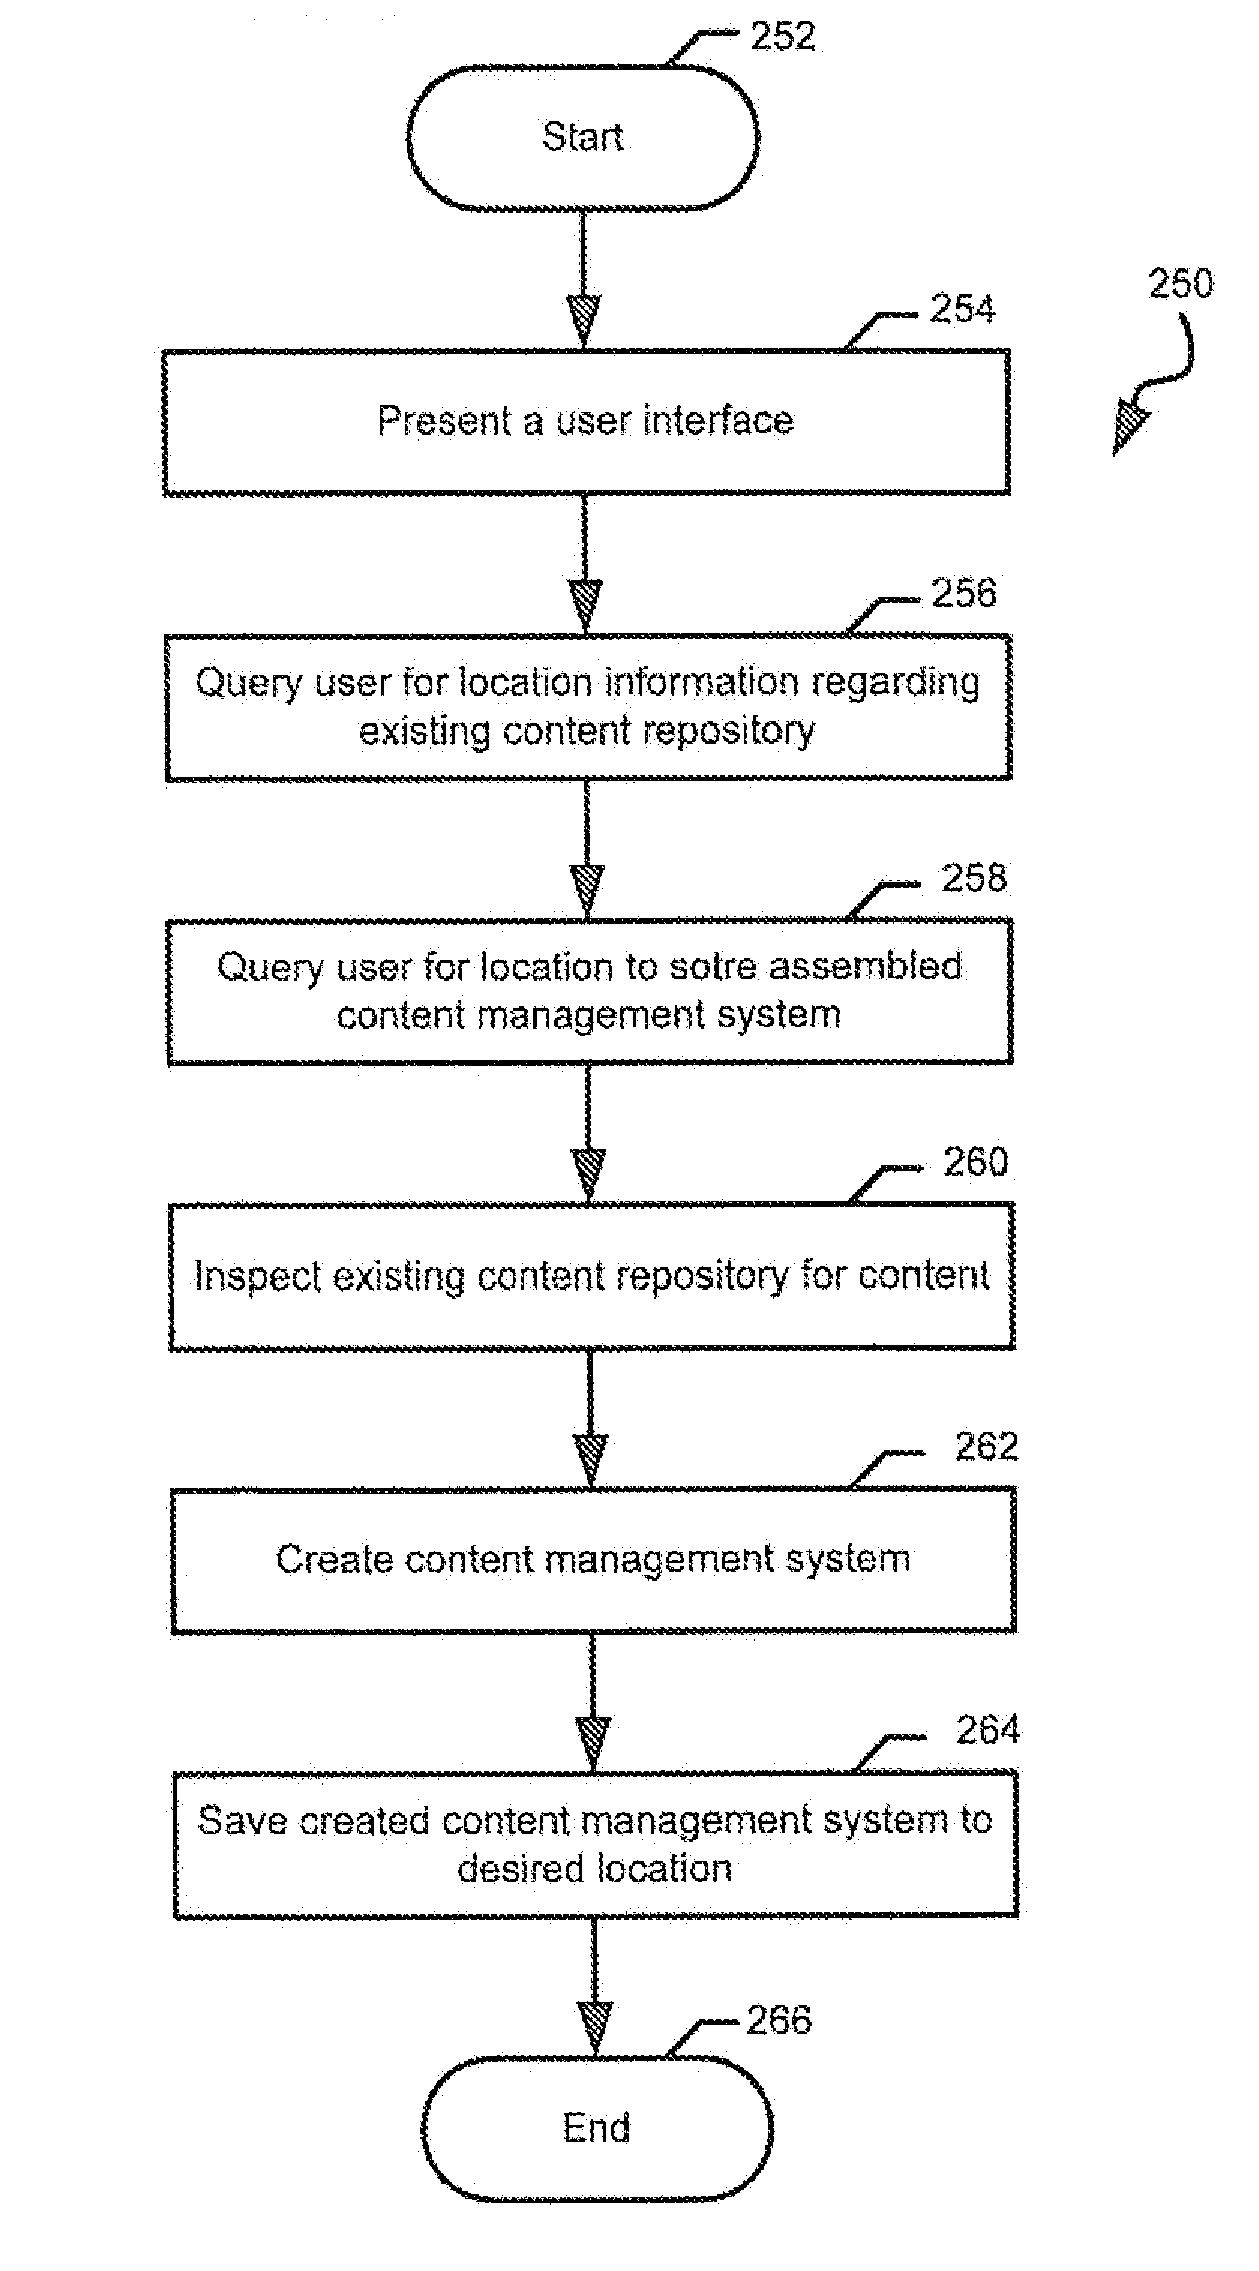 Method and computer program product for creating content management systems